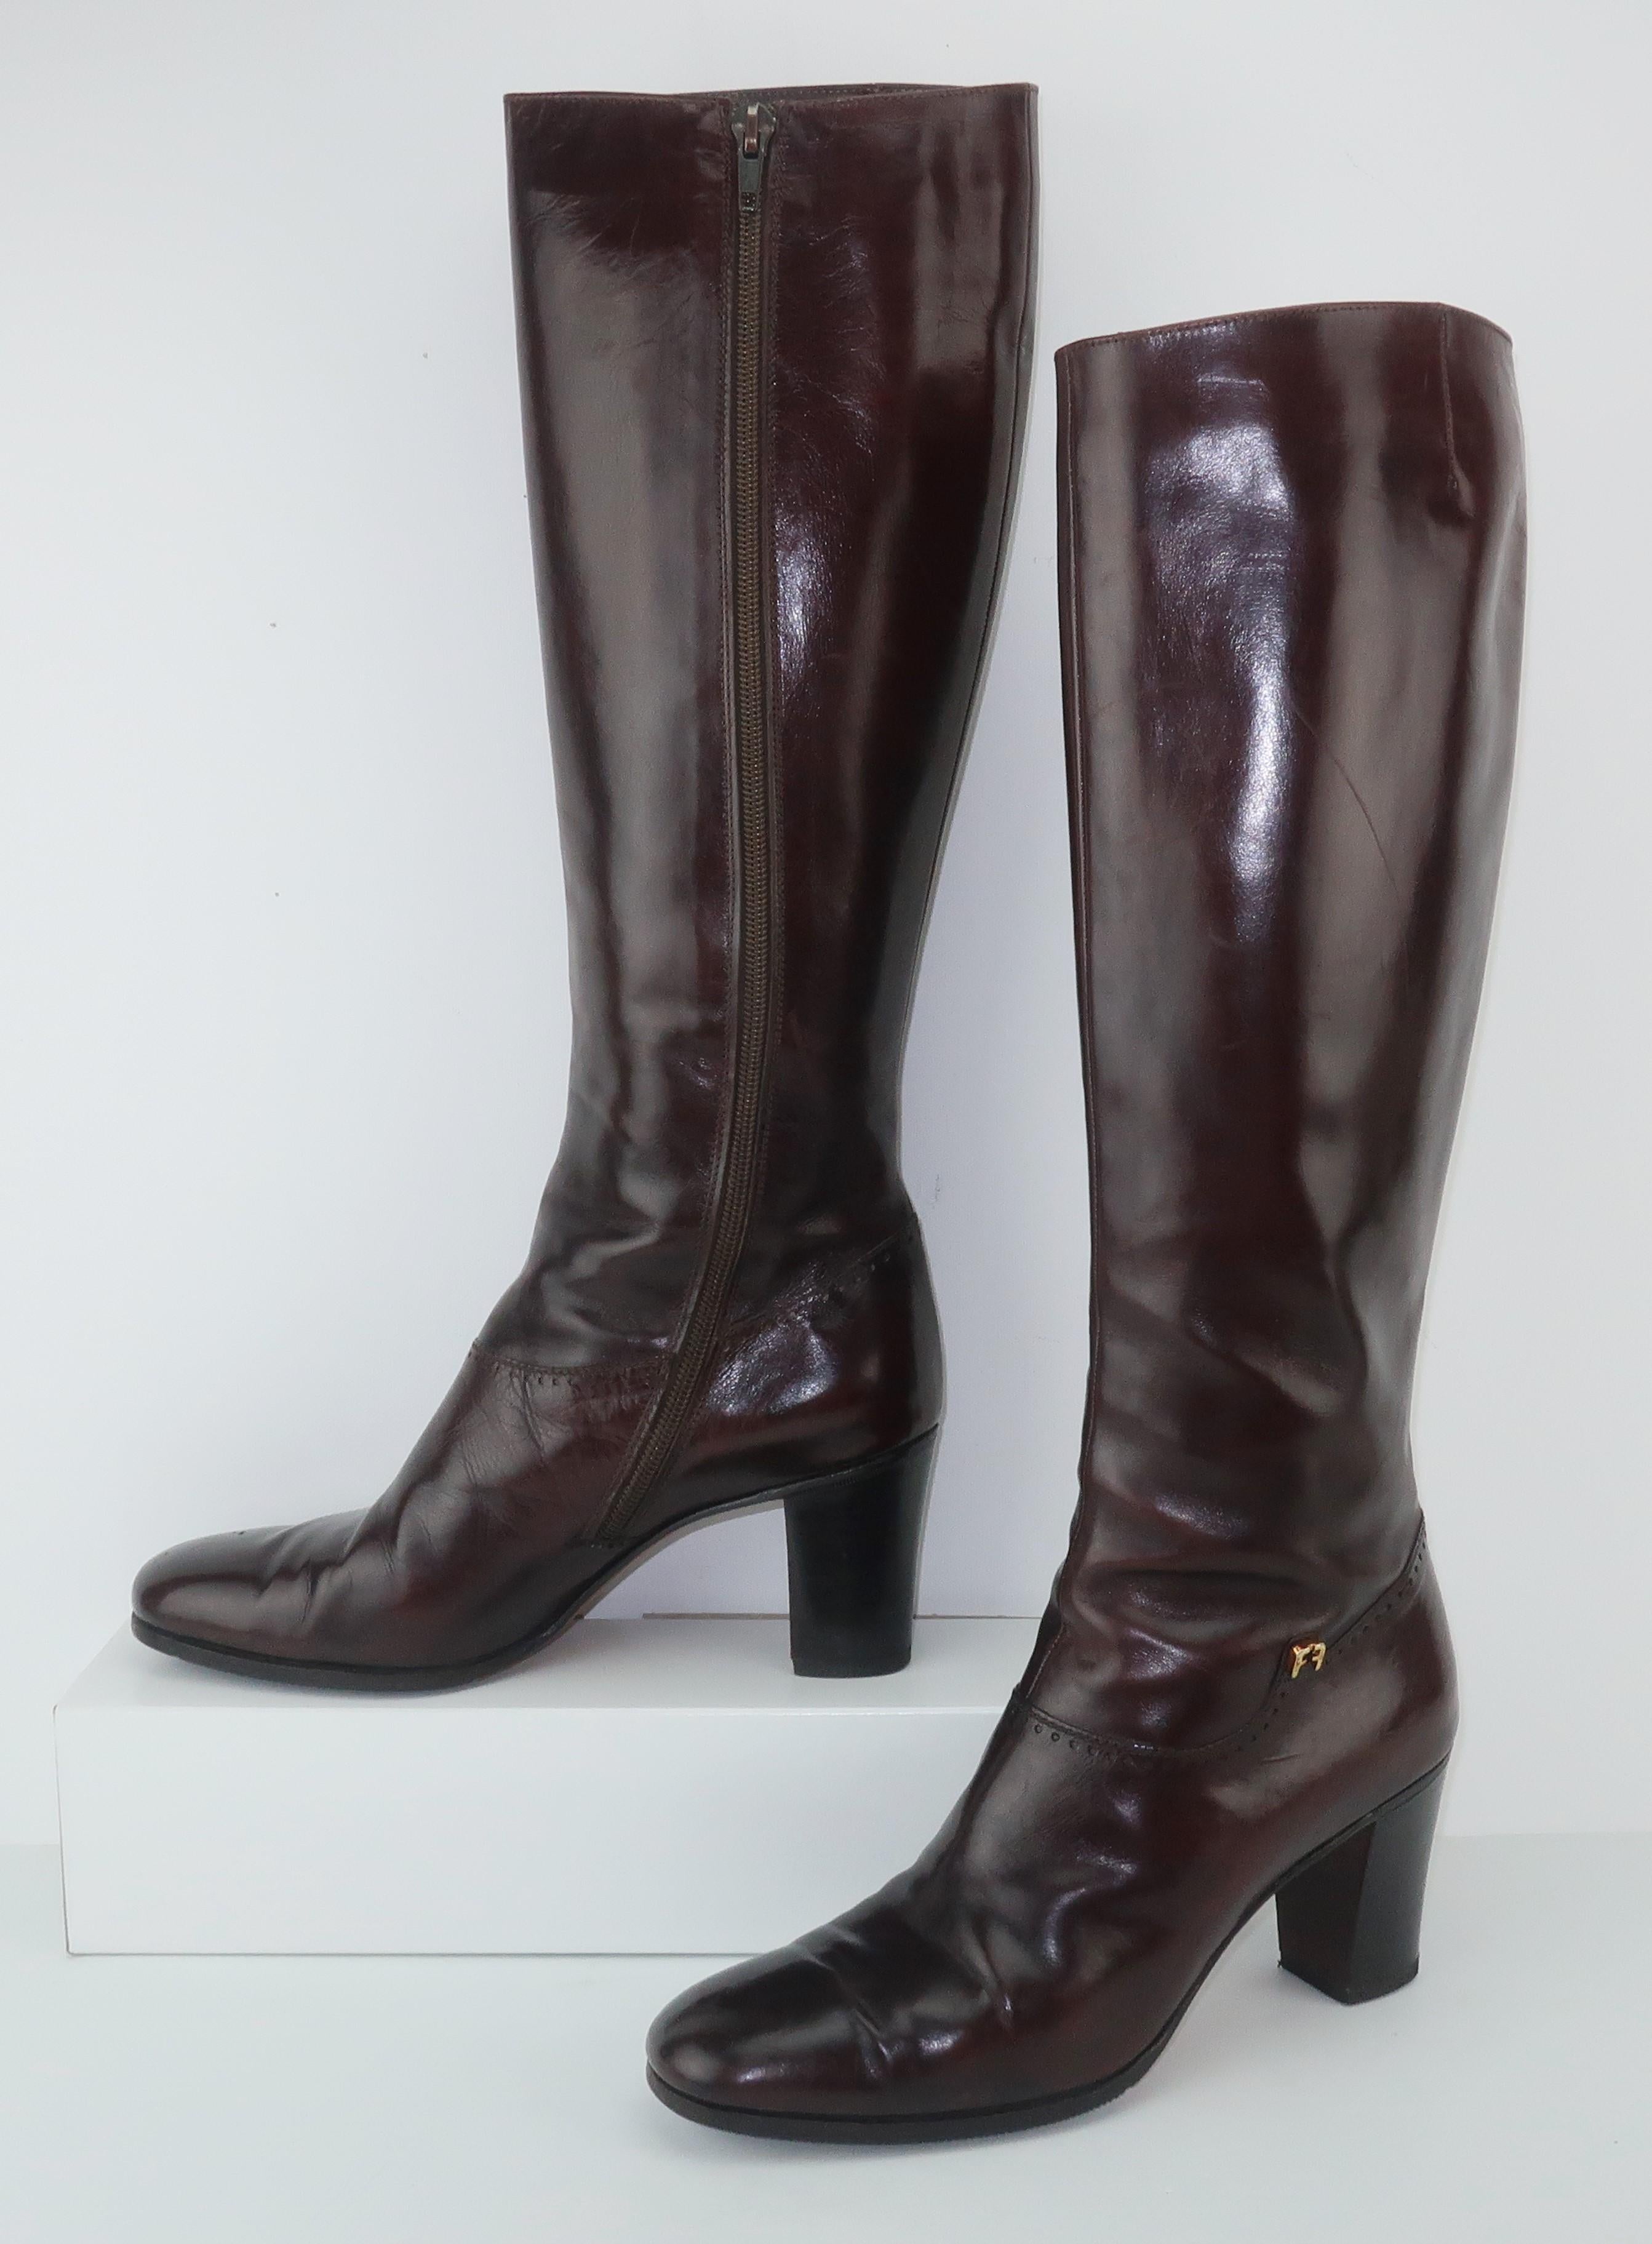 These Salvatore Ferragamo dark brown leather boots sport a classic 1970's style that is always in fashion.  The boot zips at the inner side and feature a hint of menswear detail with a subtle perforated design around the vamp reminiscent of wingtips